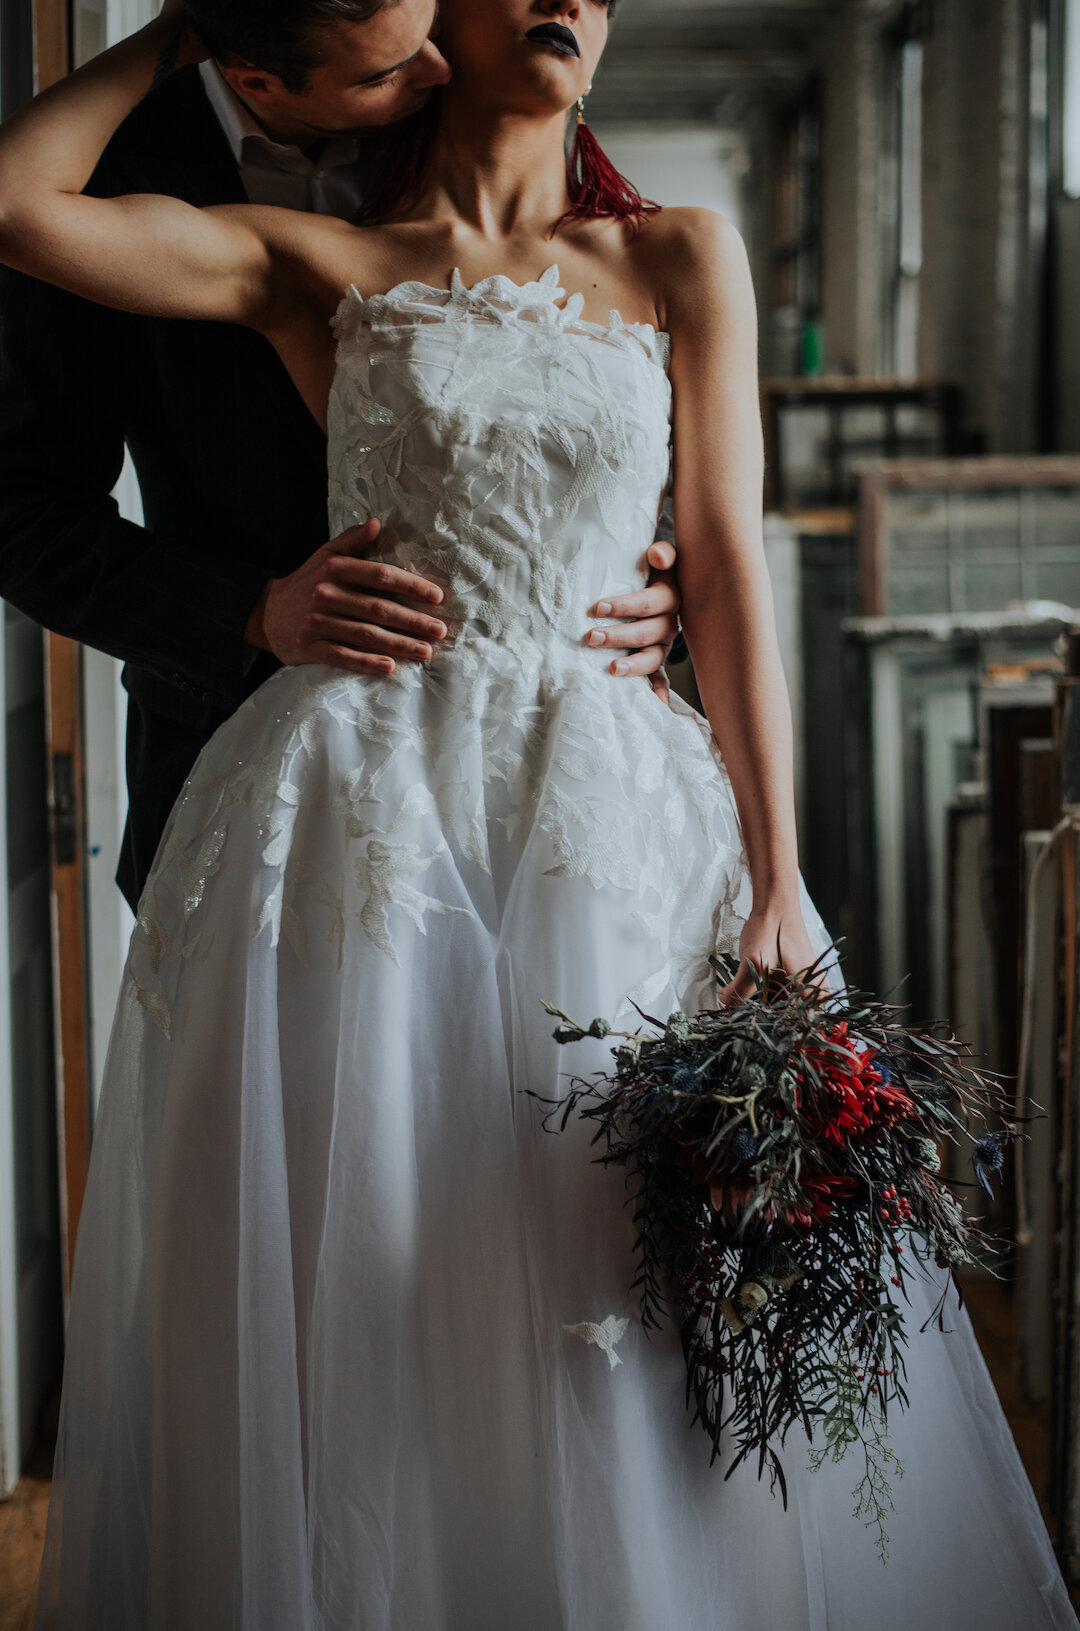 Gothic Romance in Three Story Vintage Warehouse captured by Allie Appeal and styled by Ariana Anderson featured on CHI thee WED. See more moody wedding ideas at CHItheeWED.com!